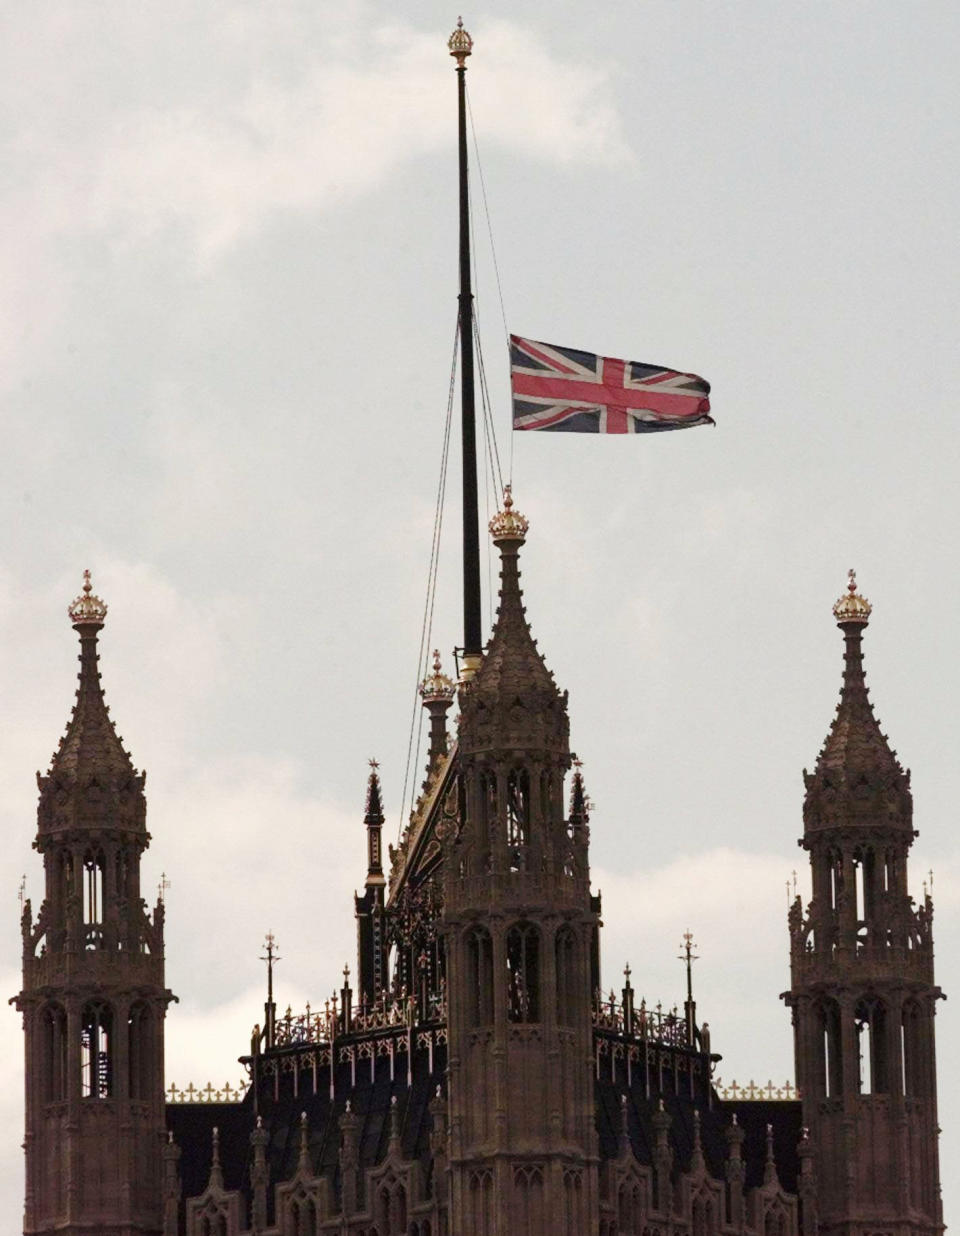 FILE - The Union Flag flies at half-mast over the Houses of Parliament in London, Aug. 31, 1997, following the death of Diana, Princess of Wales. Diana along with her companion, Dodi Fayed, and the driver of their car were killed in a car crash early Sunday in Paris. The story of Princess Diana's death at age 36 in that catastrophic crash in a Paris traffic tunnel continues to shock, even a quarter-century later. (AP Photo/Lynne Sladky, File)